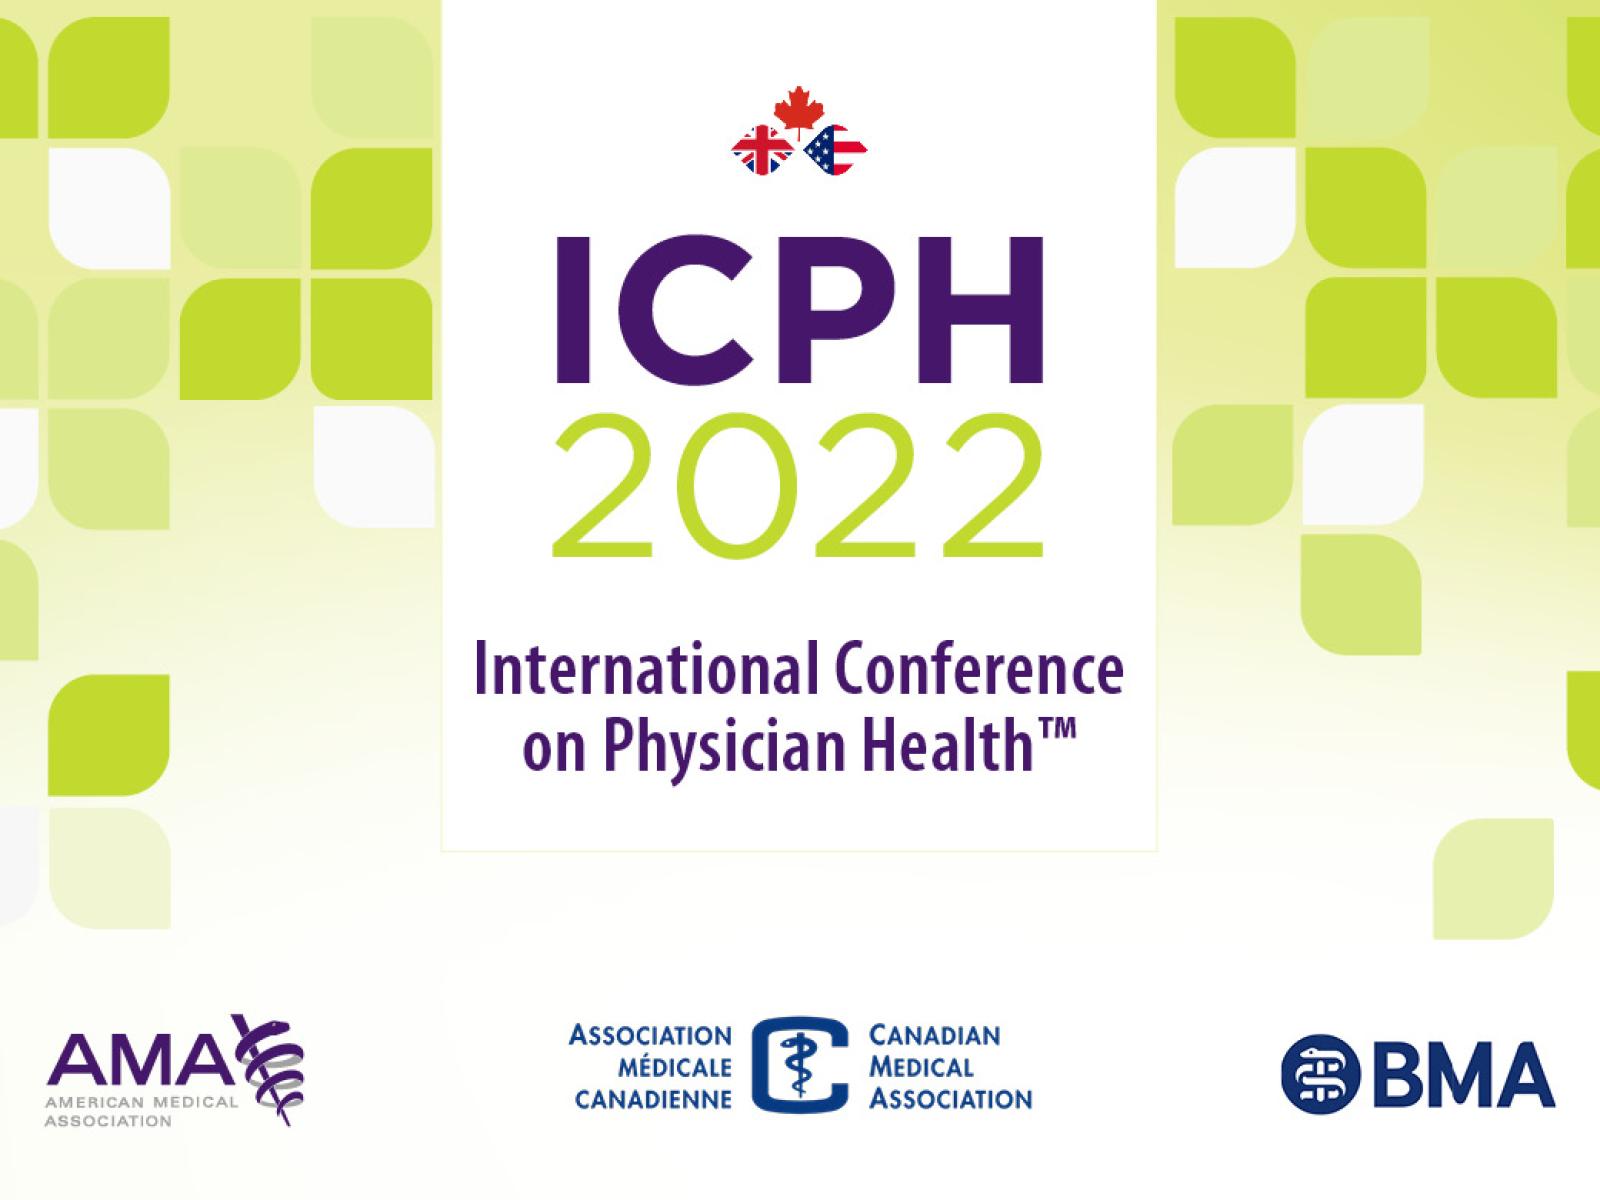 2022 International Conference on Physician Health (ICPH)